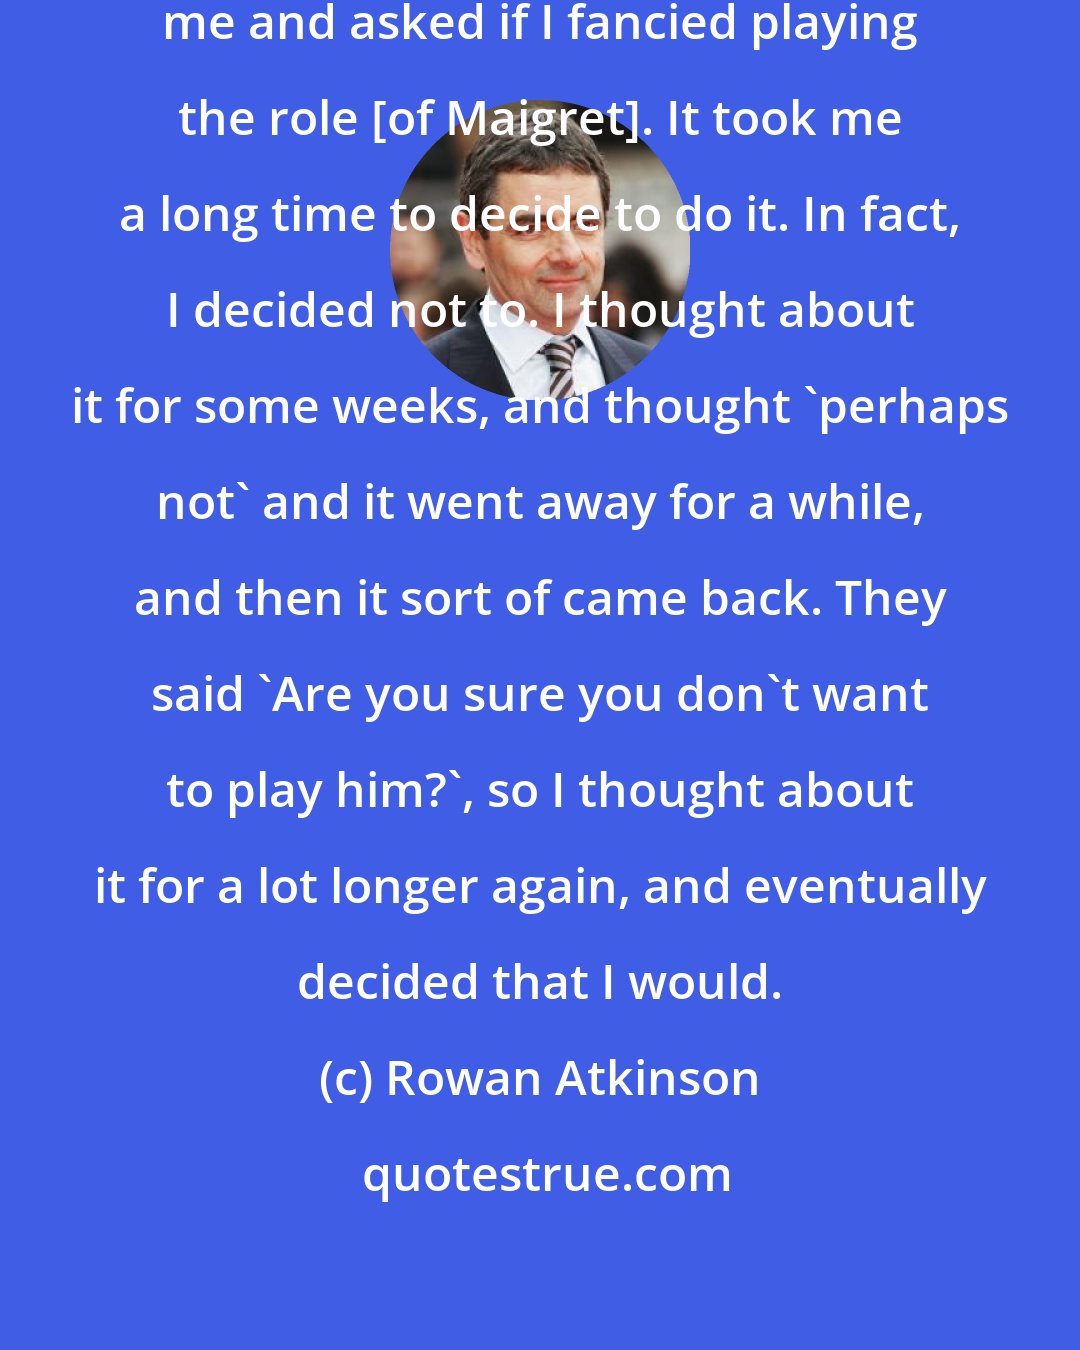 Rowan Atkinson: ITV and the production company contacted me and asked if I fancied playing the role [of Maigret]. It took me a long time to decide to do it. In fact, I decided not to. I thought about it for some weeks, and thought 'perhaps not' and it went away for a while, and then it sort of came back. They said 'Are you sure you don't want to play him?', so I thought about it for a lot longer again, and eventually decided that I would.